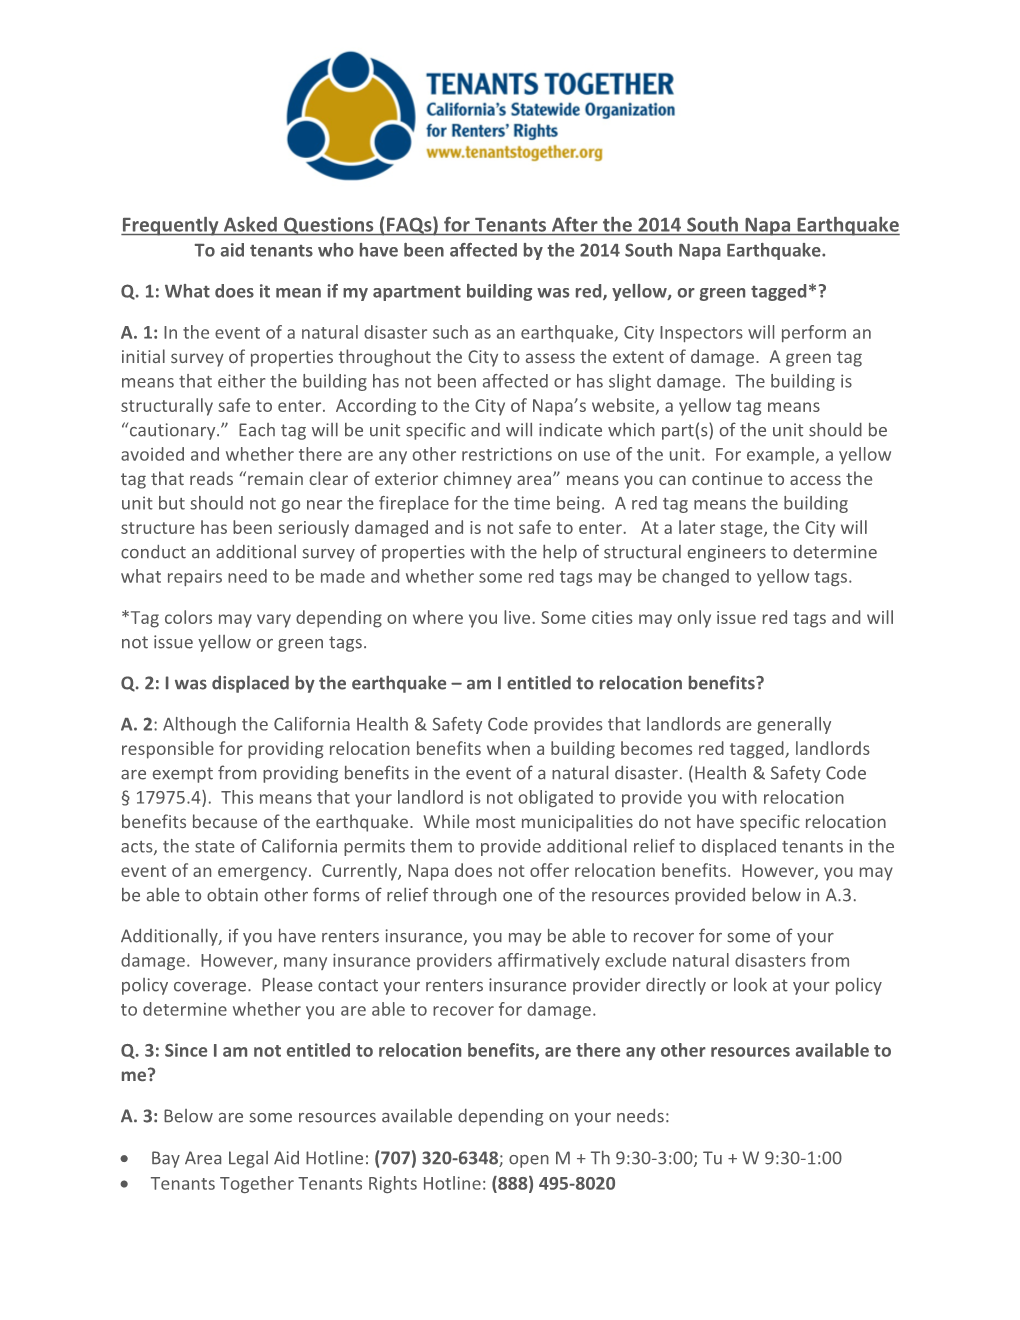 (Faqs) for Tenants After the 2014 South Napa Earthquake to Aid Tenants Who Have Been Affected by the 2014 South Napa Earthquake